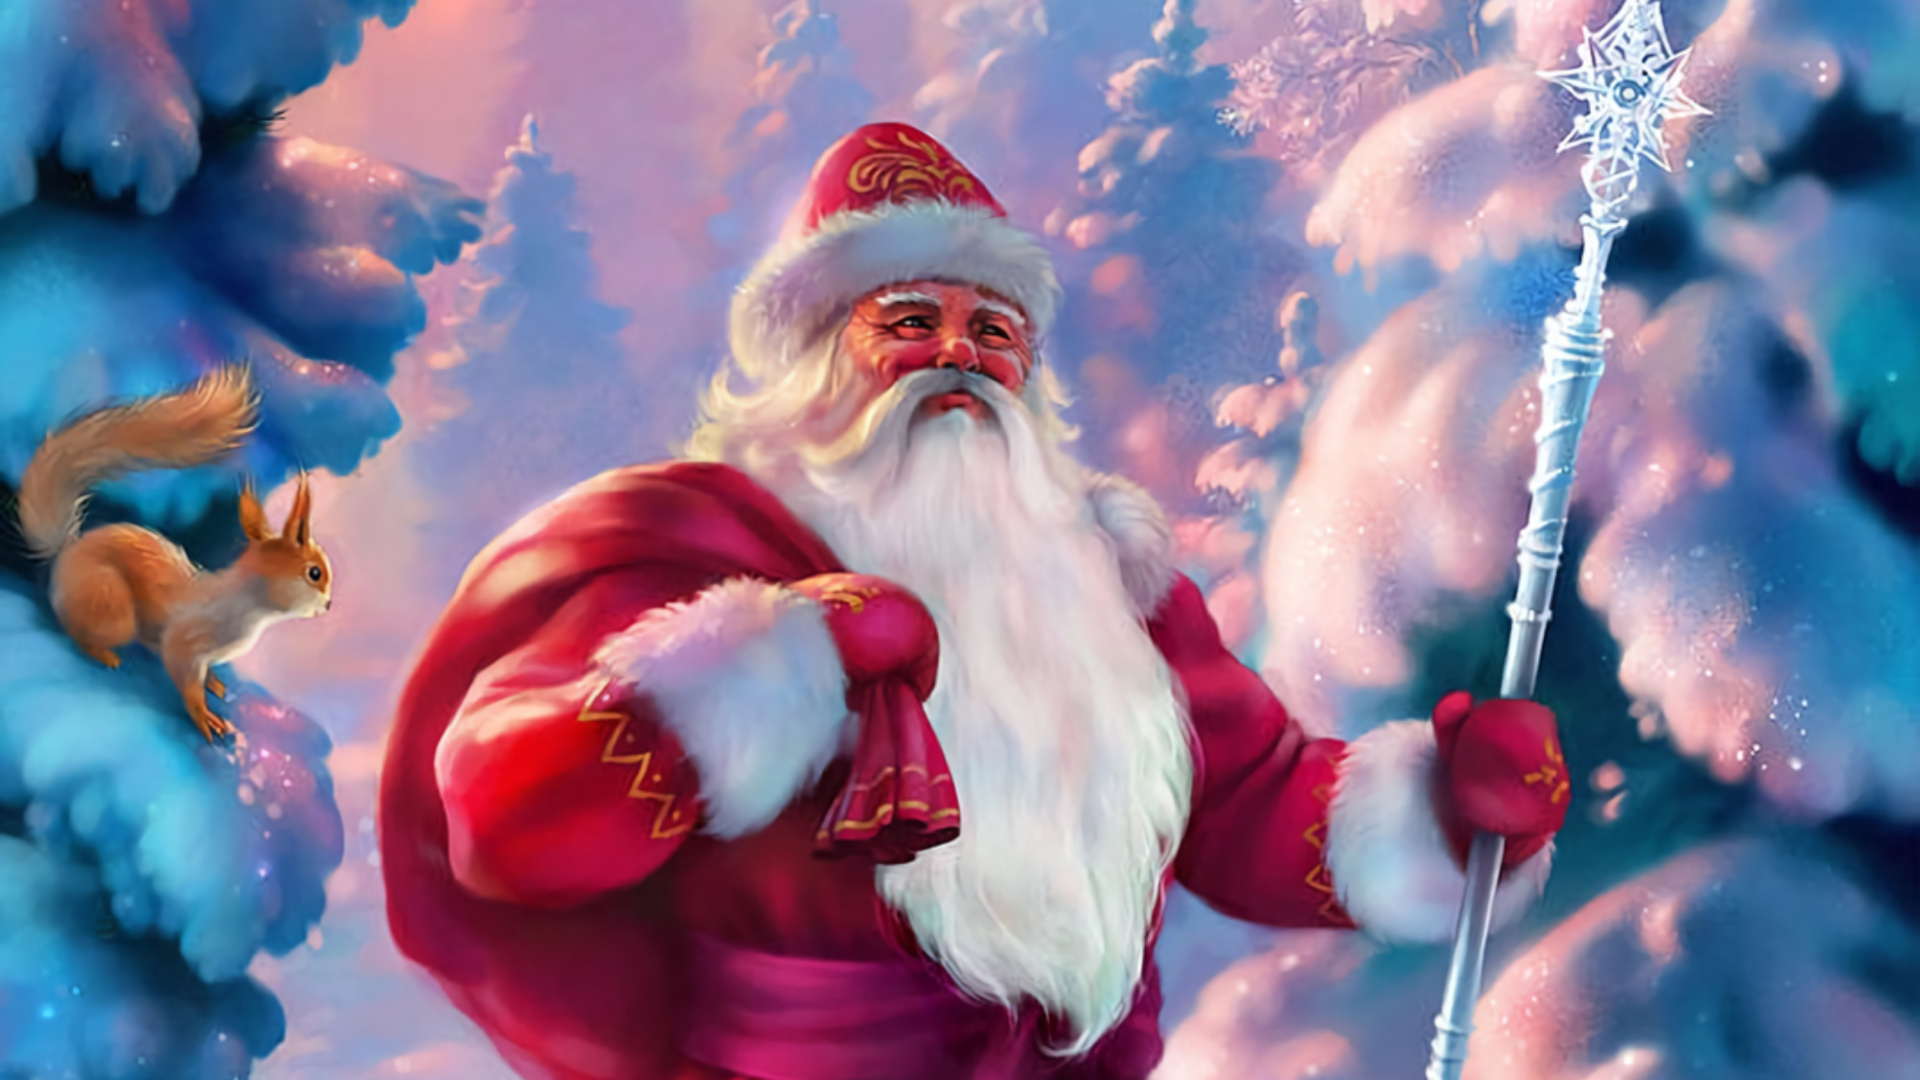 Santa Claus, Ded Moroz, Christmas Day, Christmas, Animation. Wallpaper in 1920x1080 Resolution